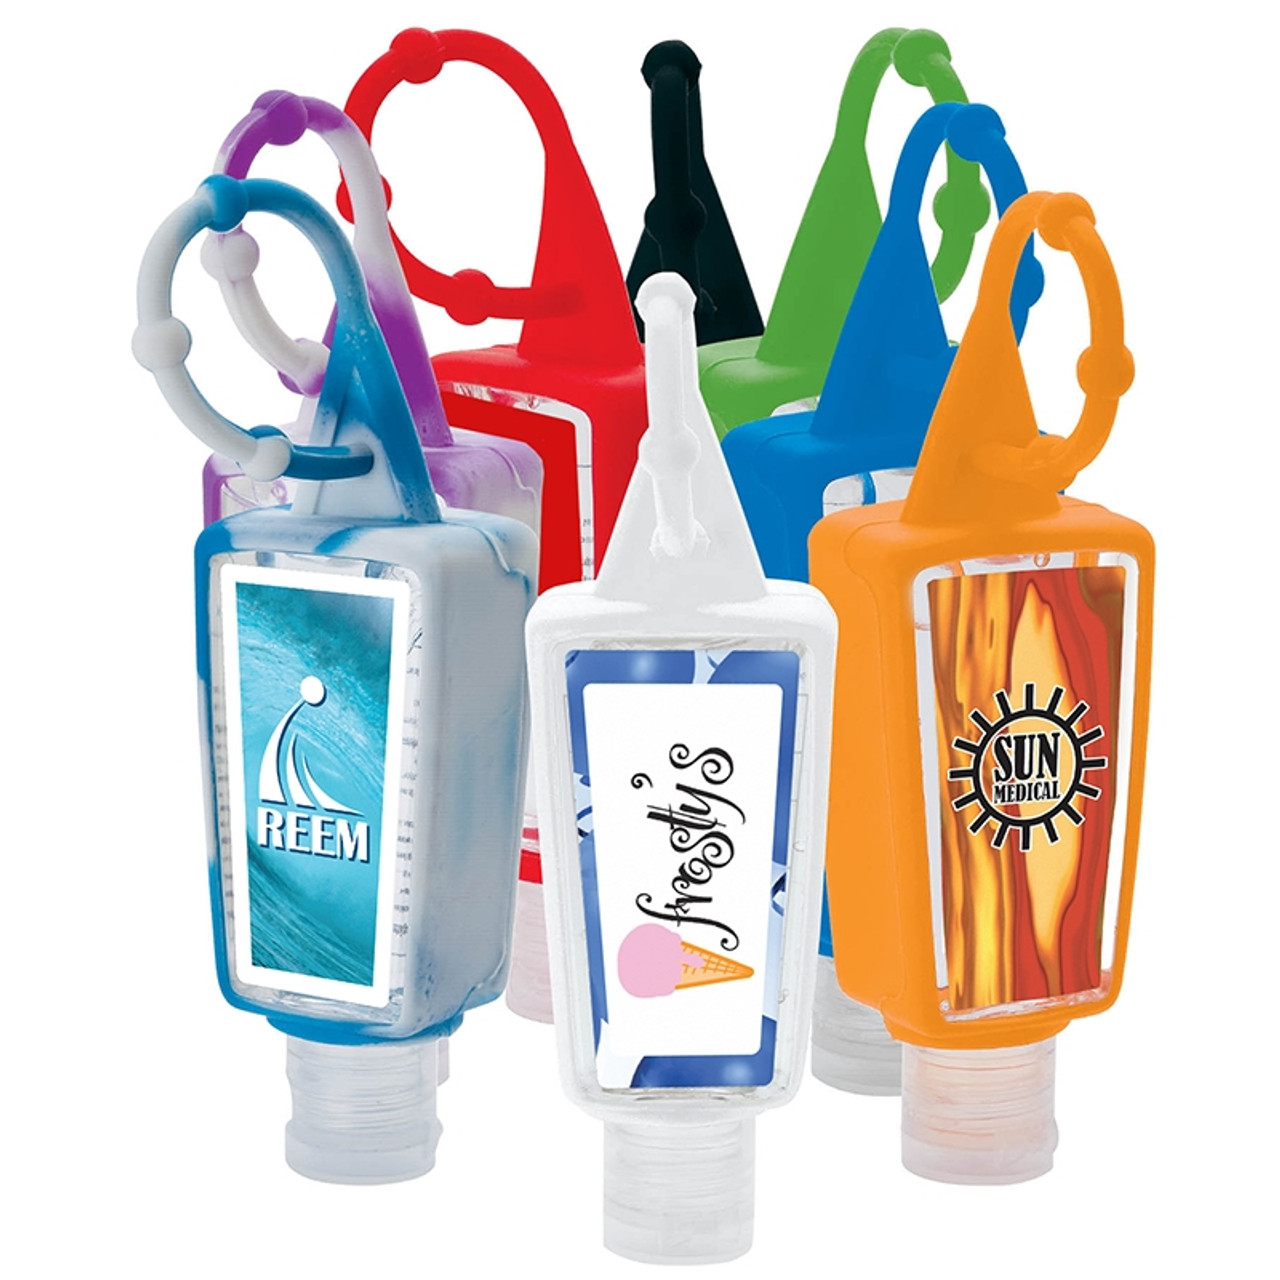 Airplane Pockets, 2 oz Hand Sanitizer And 10pc Face Mask Combo Kit -  Connecticut Advertising